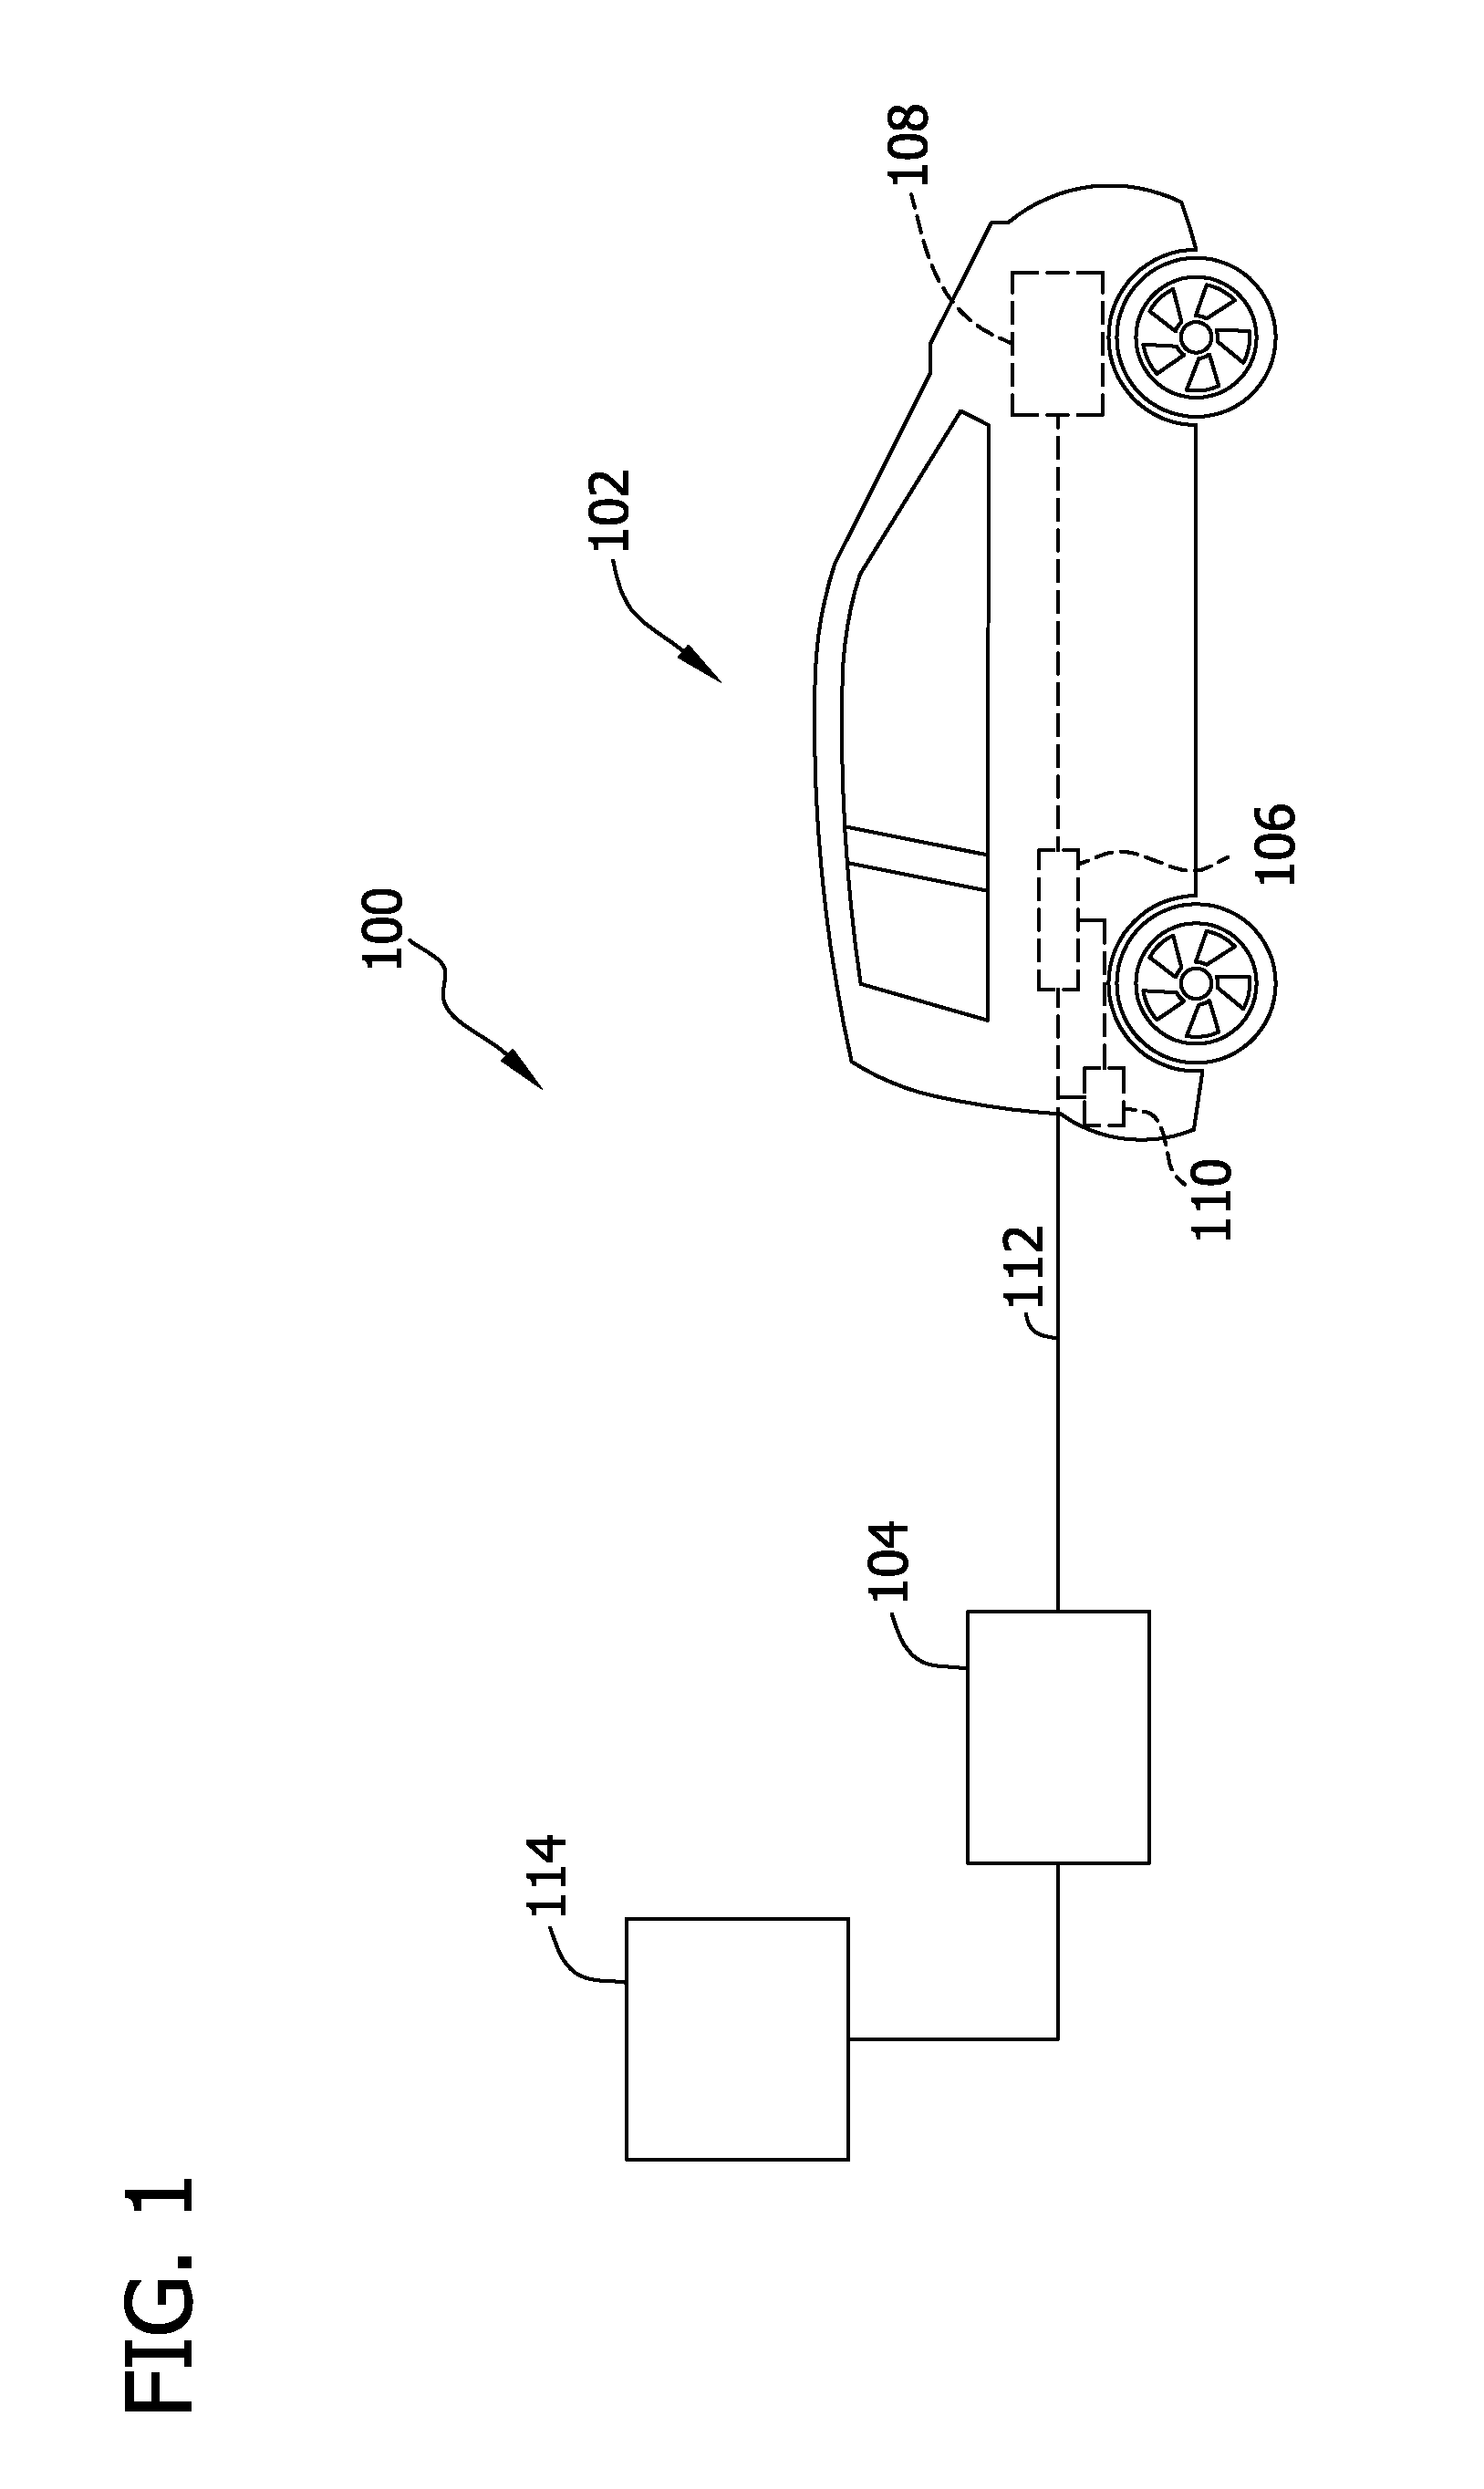 Charging system, kiosk, and method of reserving a power charging device and supplying current to a power storage device